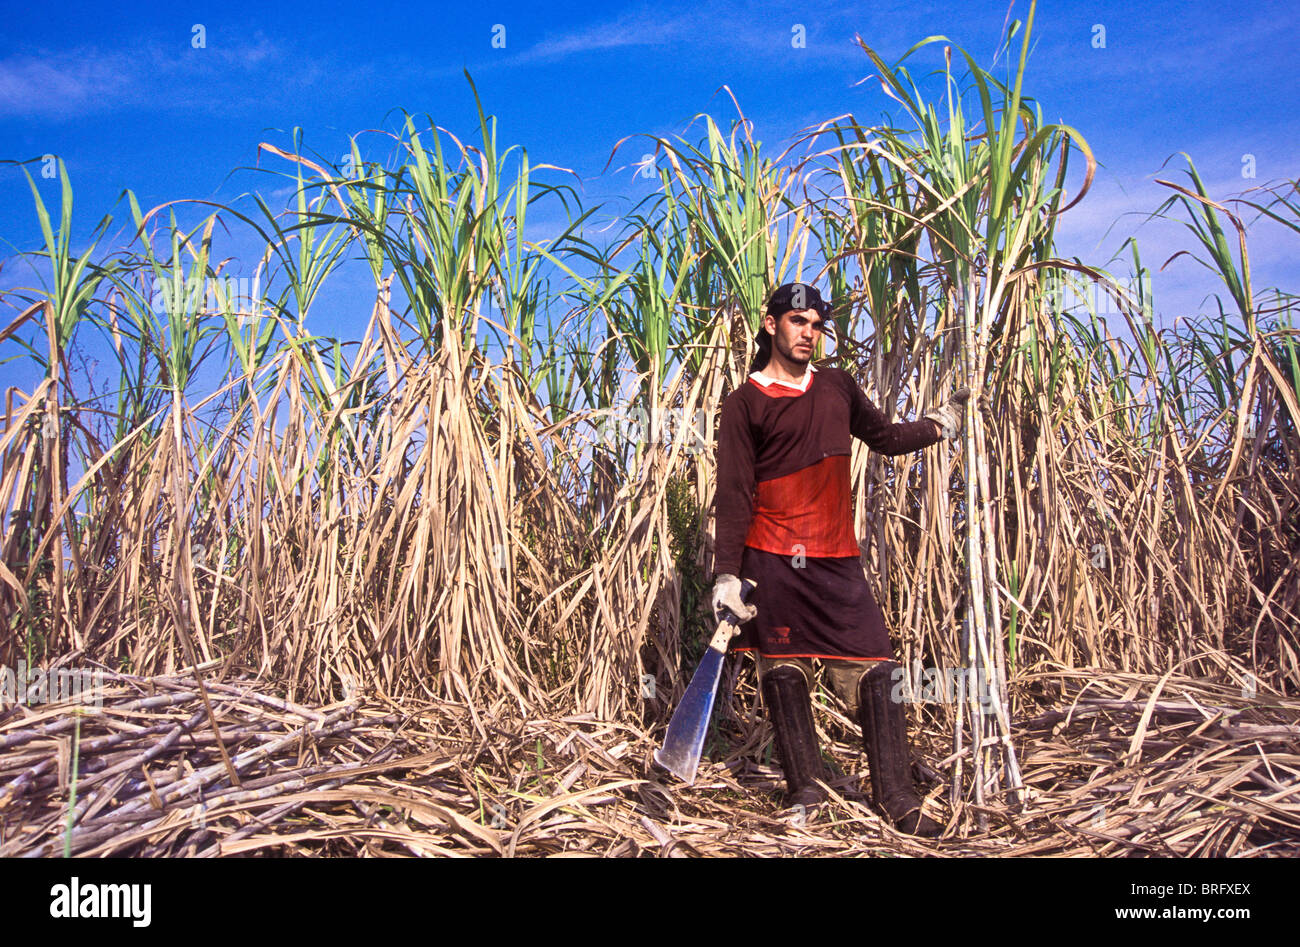 Portrait of a Sugar Cane worker on a large 'fazenda' ranch in the state of Sao Paulo, Brazil Stock Photo